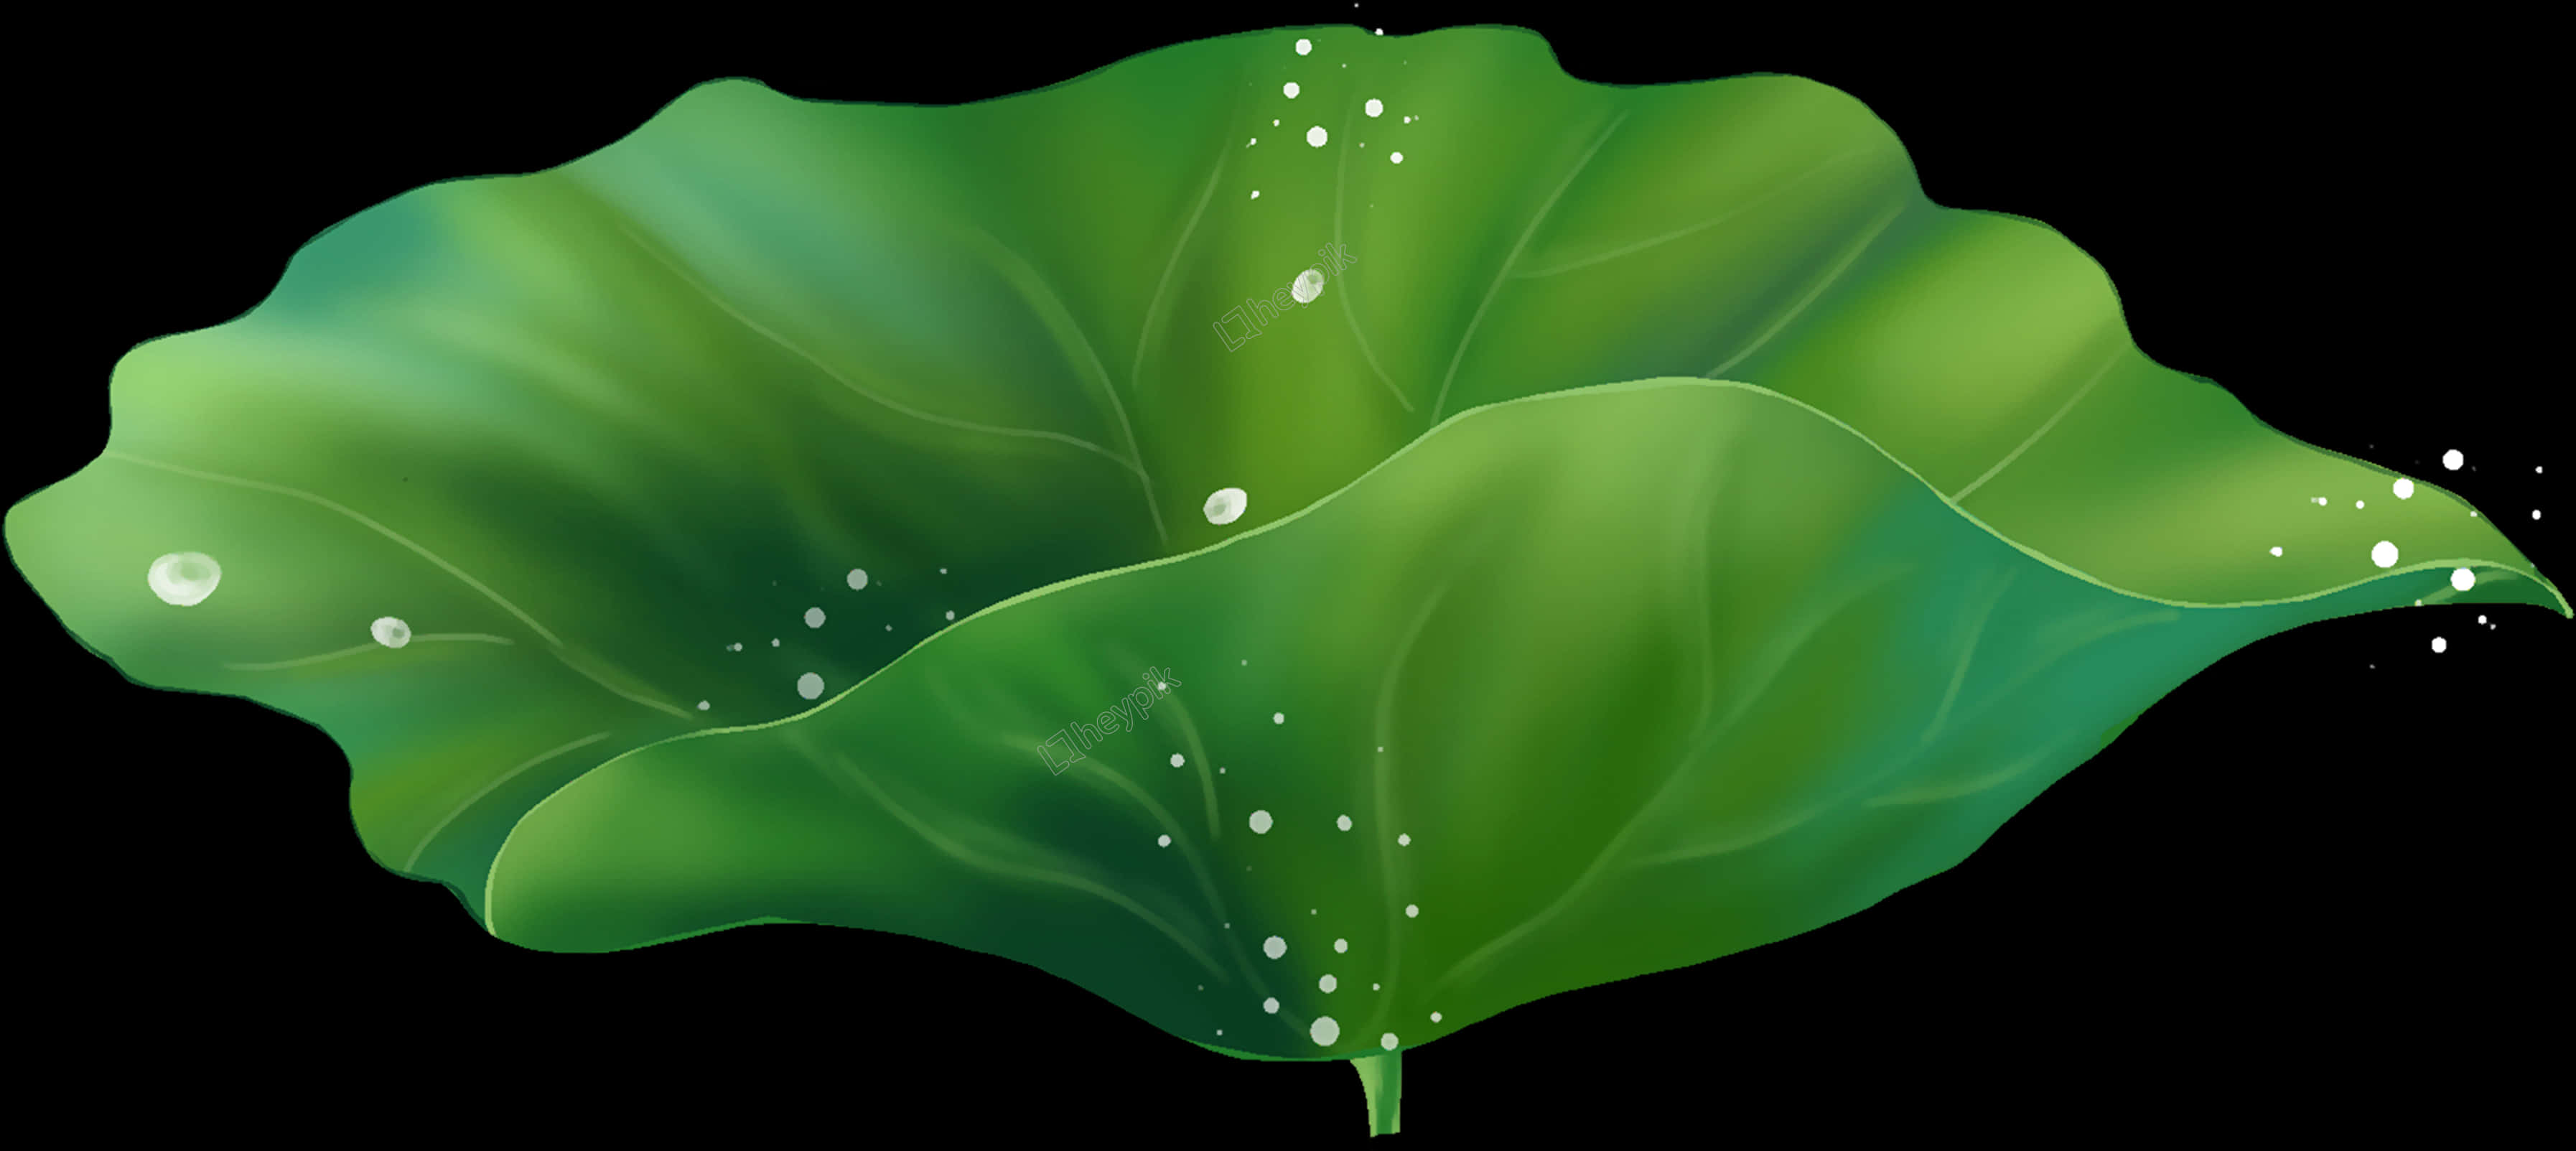 Green Lotus Leafwith Dew Drops PNG image